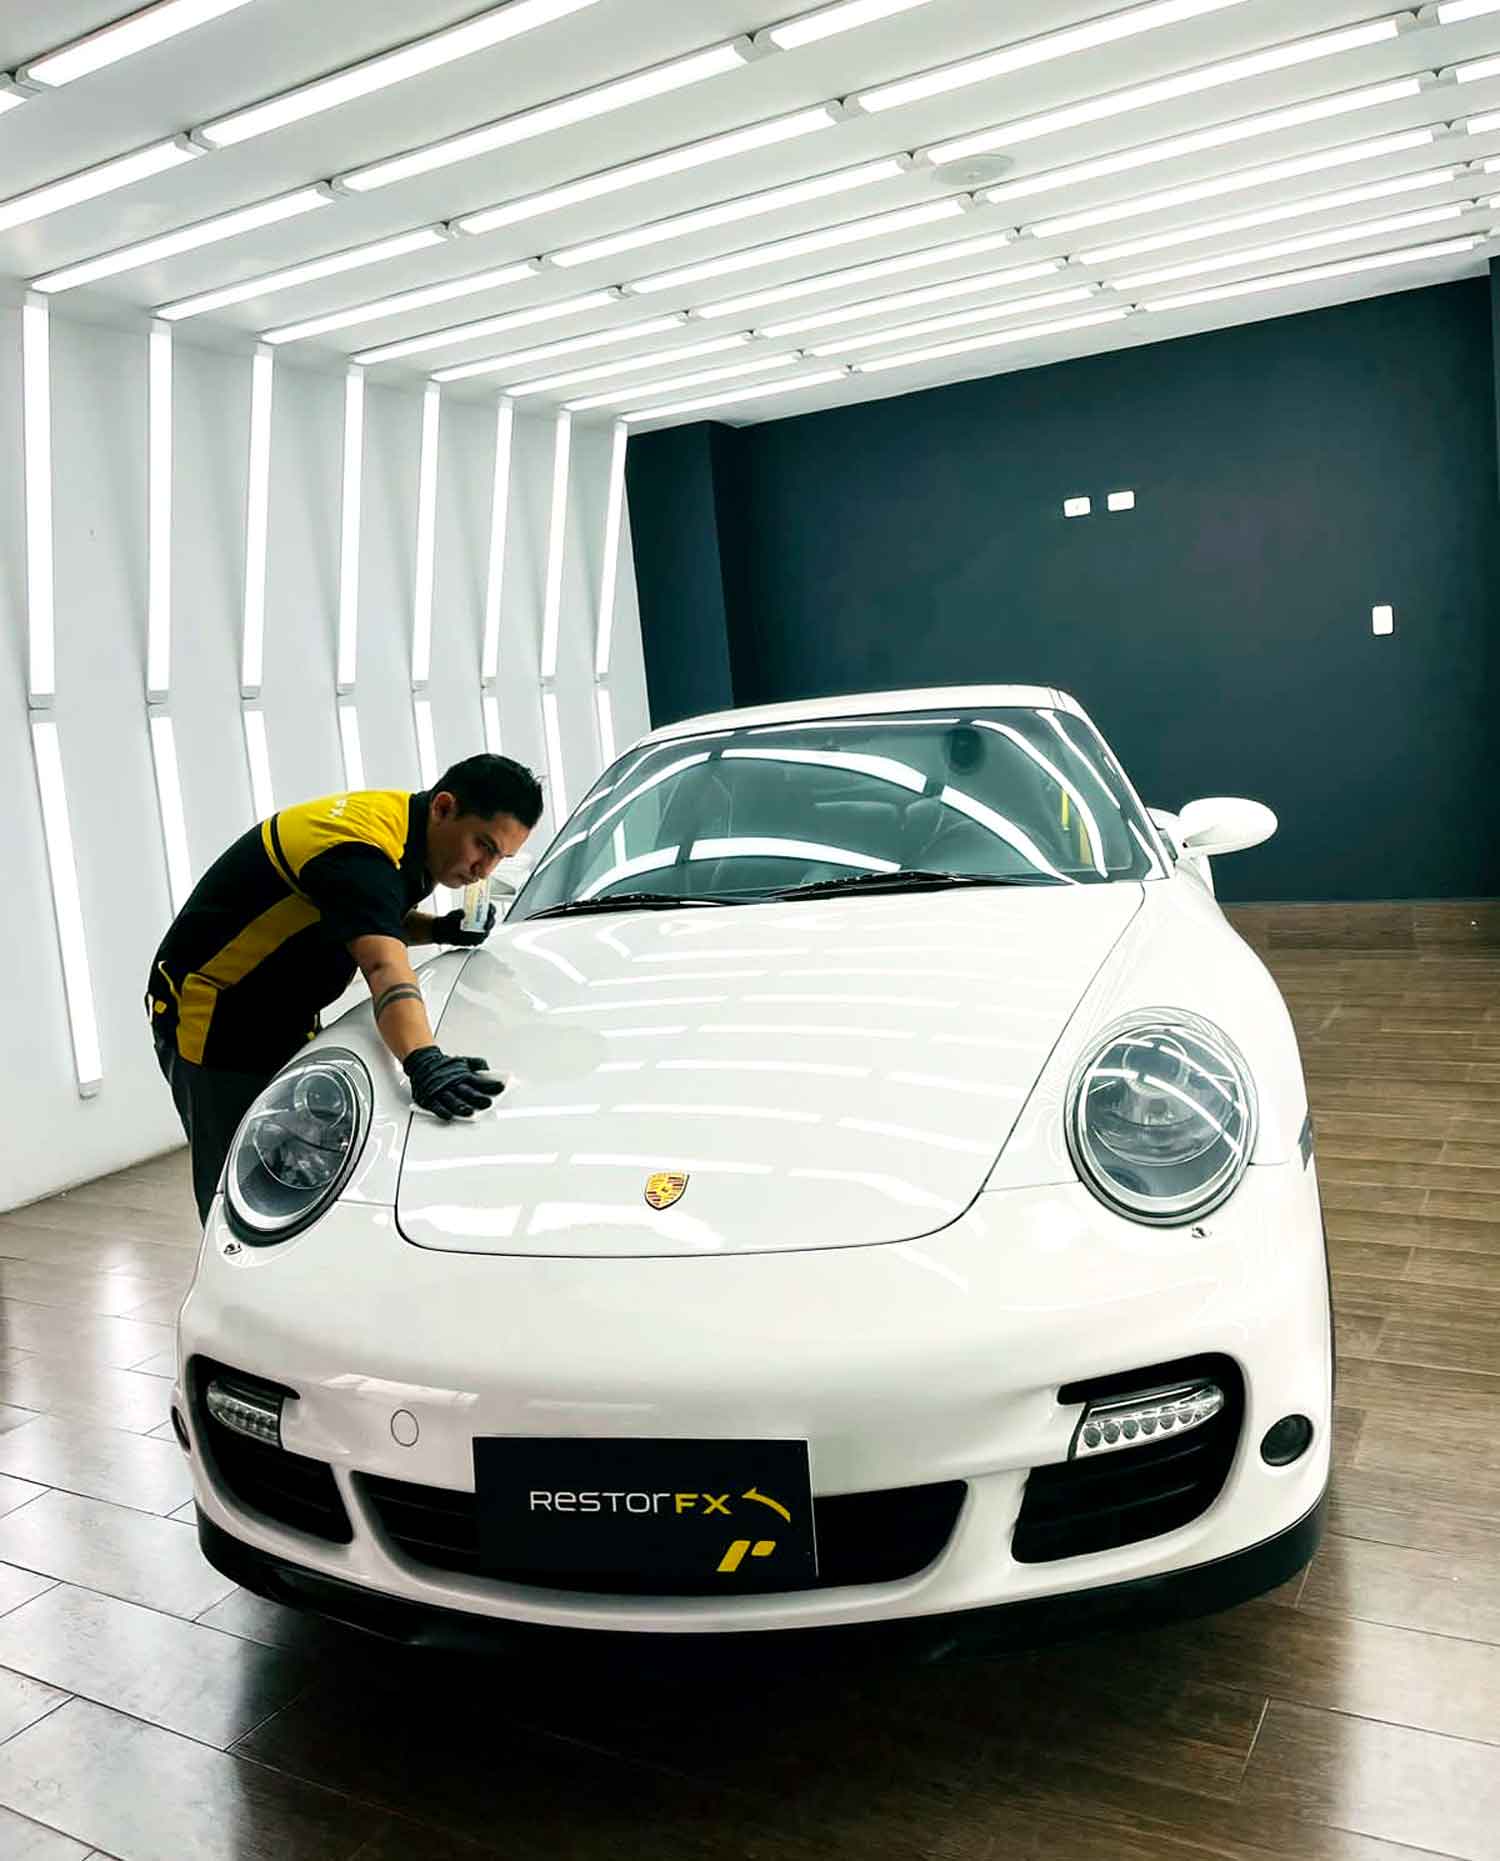 RestorFX tech applying RestorFX product on to a white Porsche parked in a well lit booth